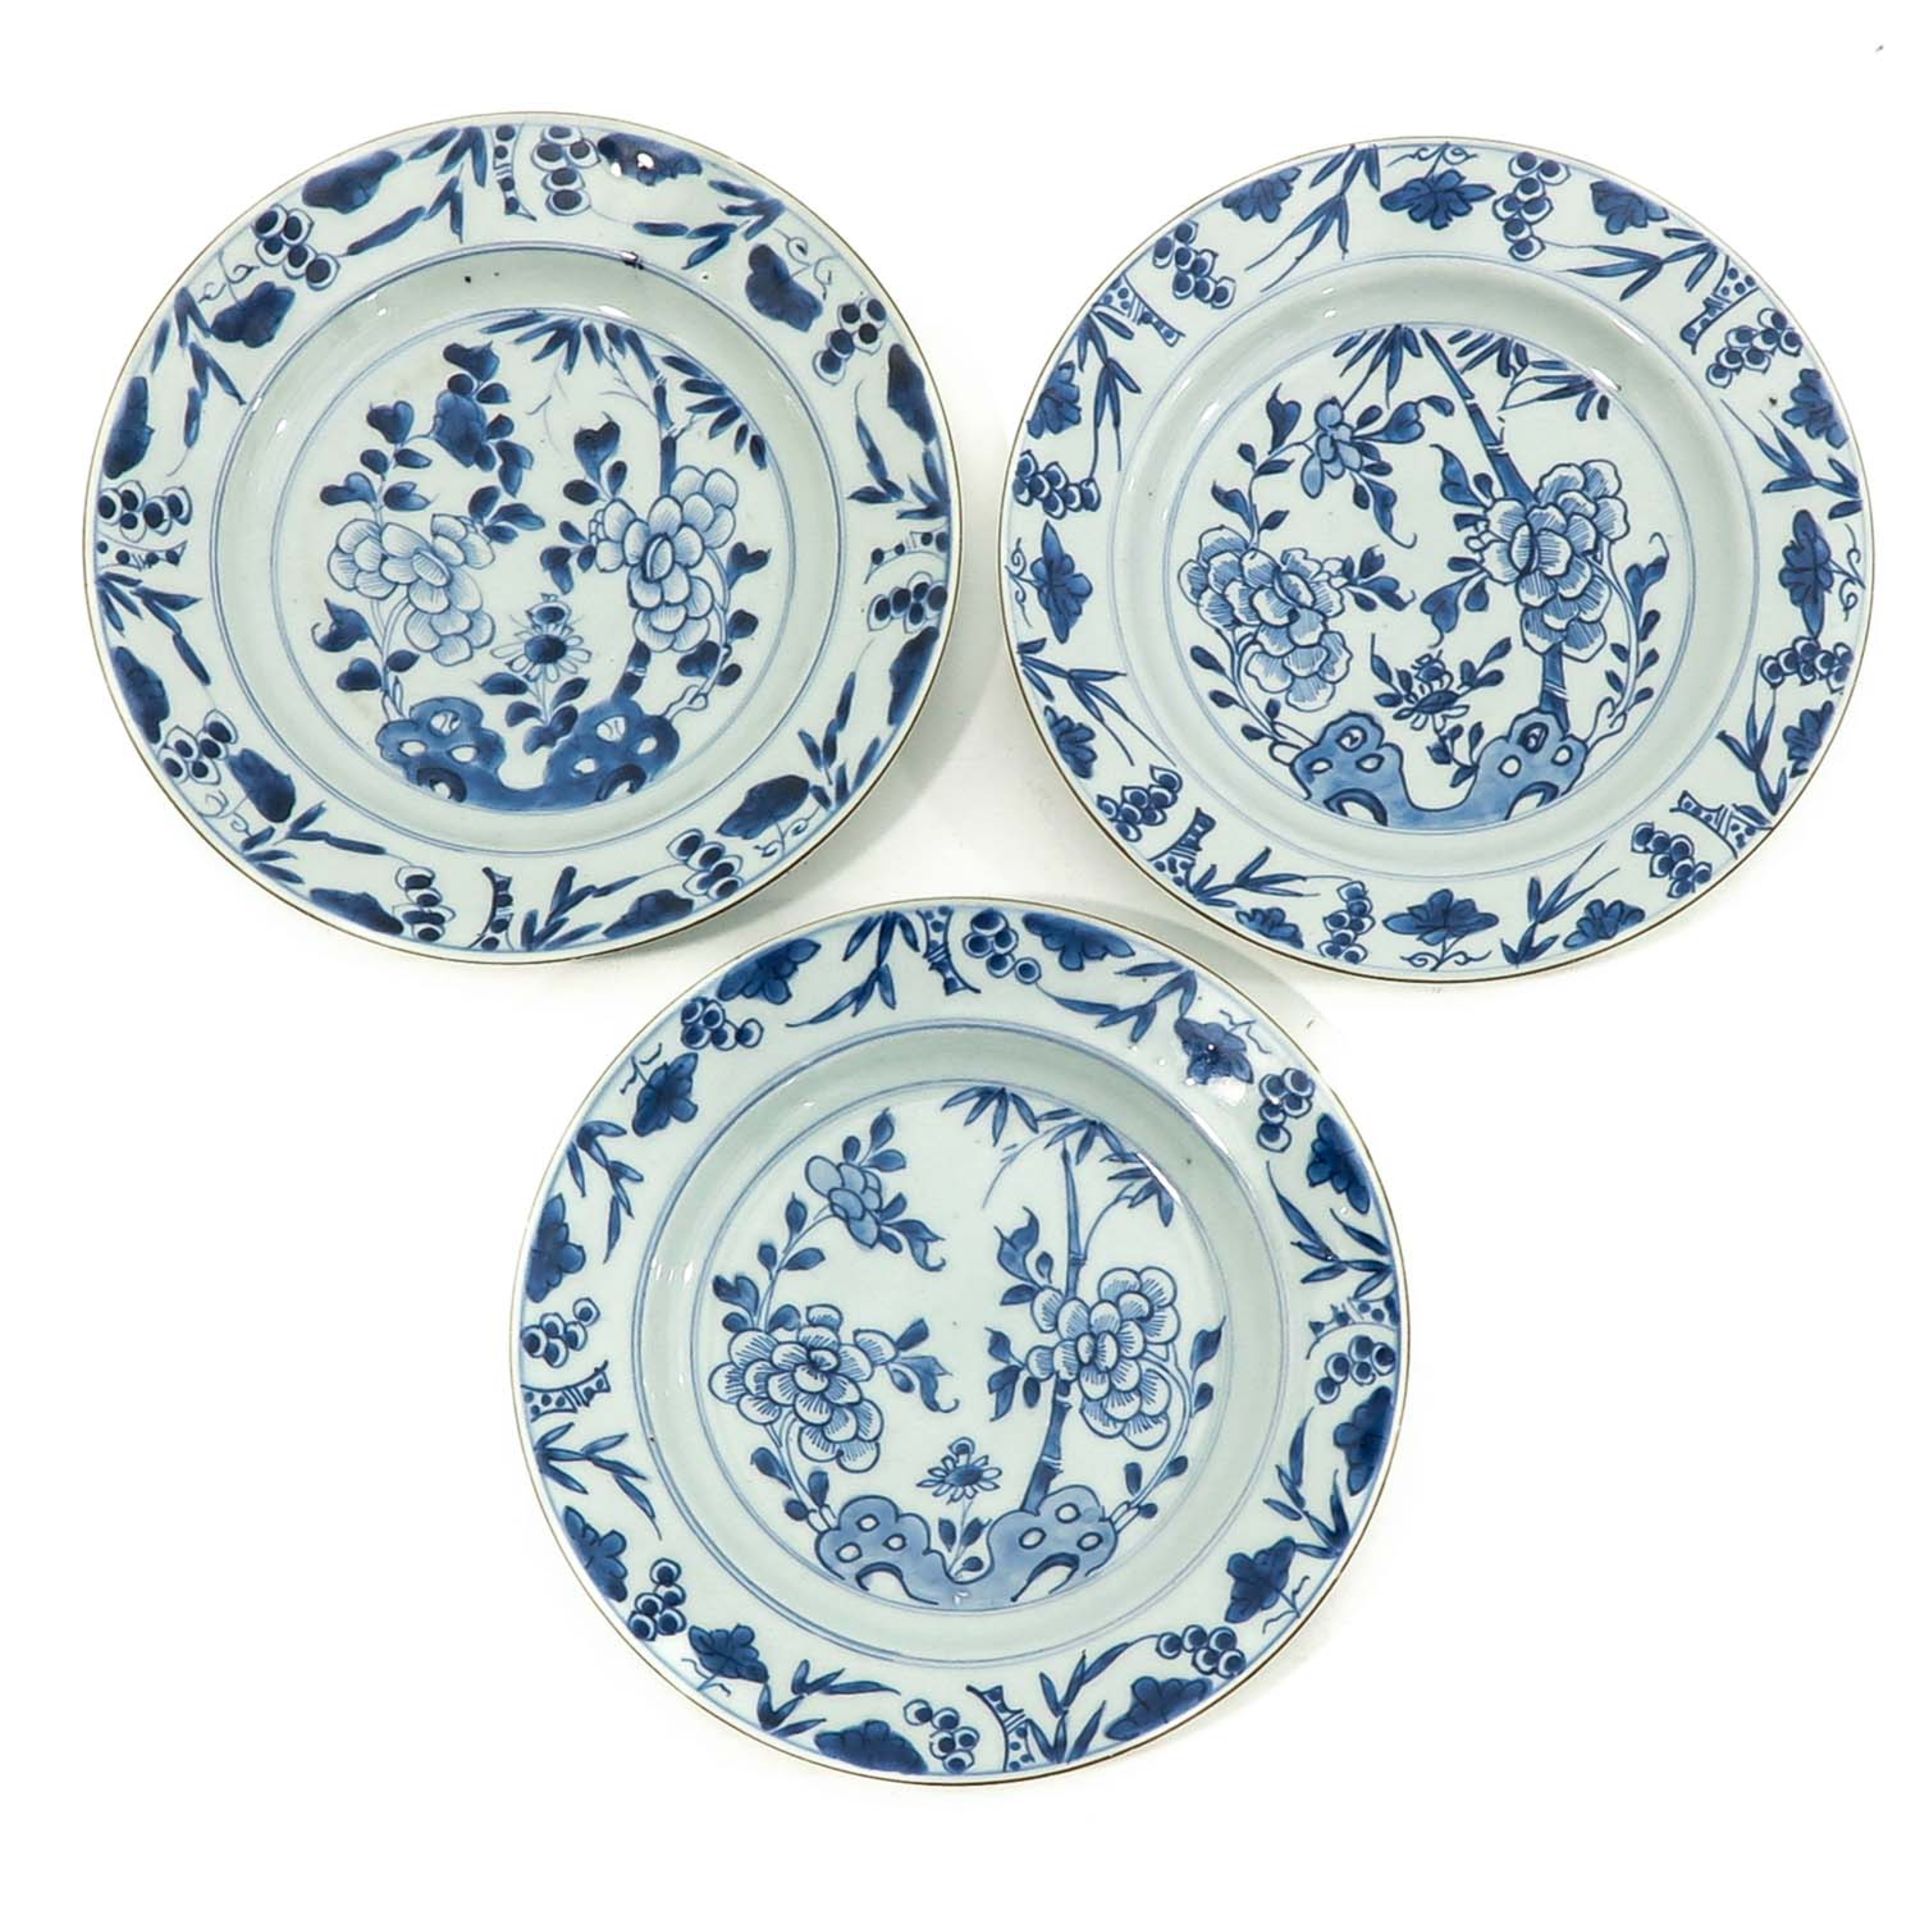 A Series of 5 Blue and White Plates - Bild 3 aus 9